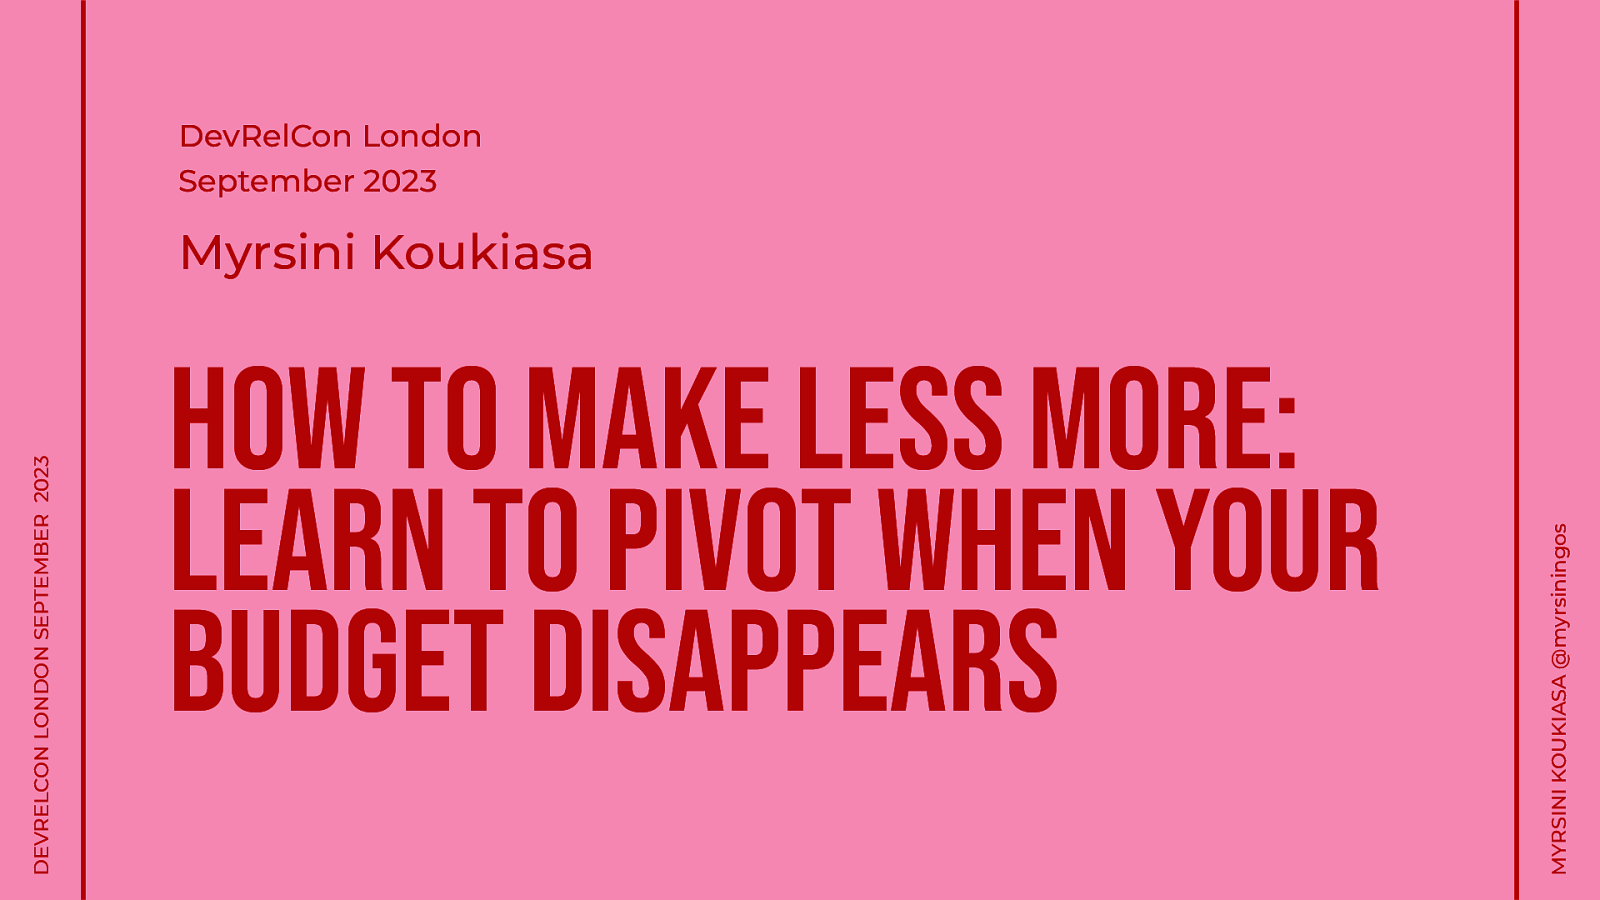 How to make less more: learn to pivot when your budget disappears